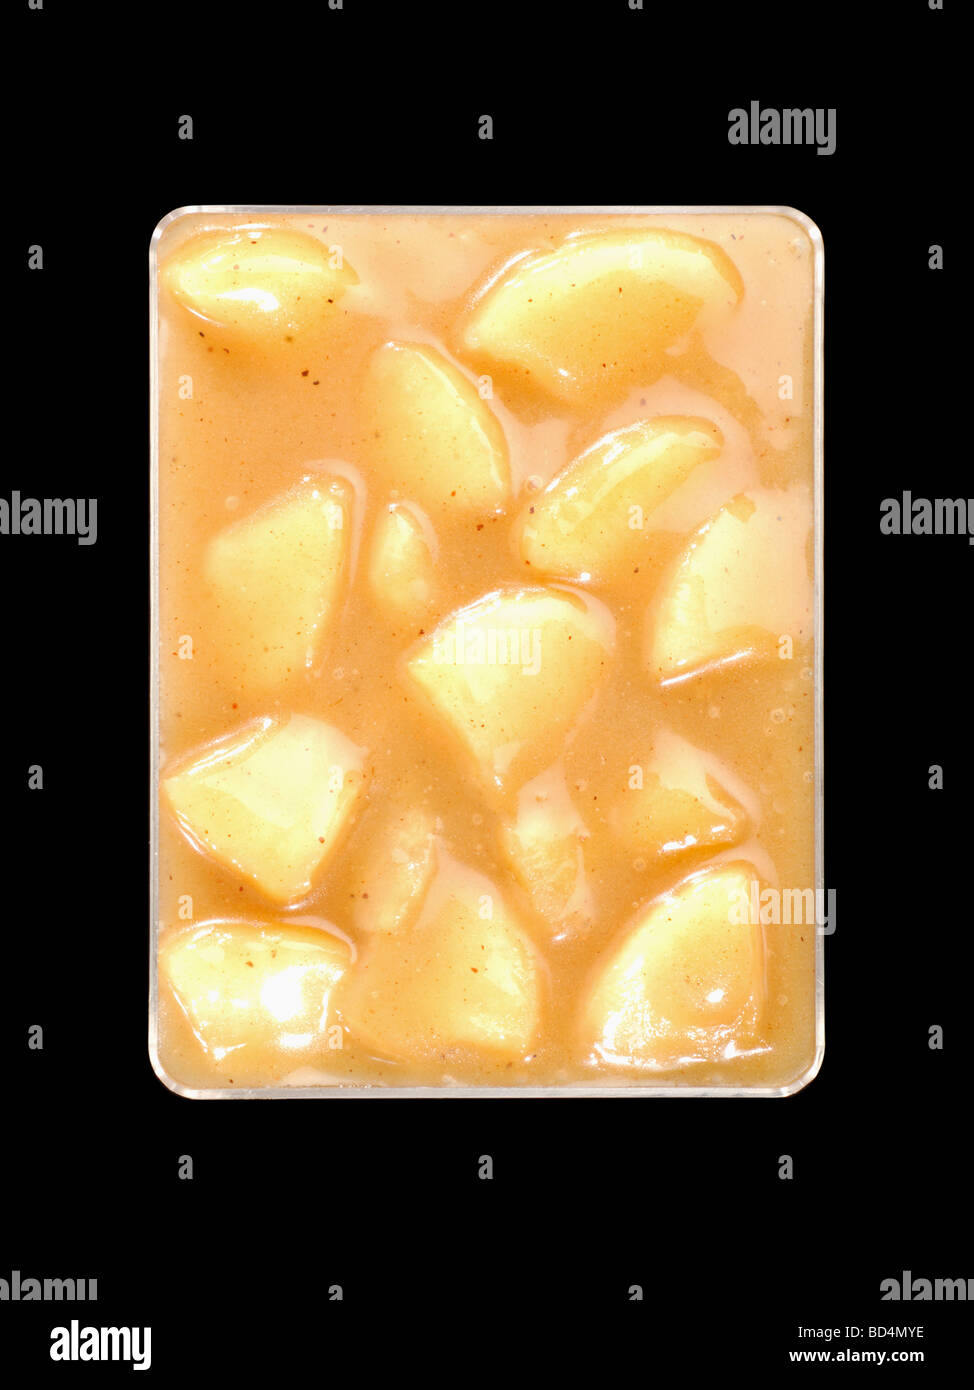 A plastic container with military food rations, sliced peaches in sauce Stock Photo